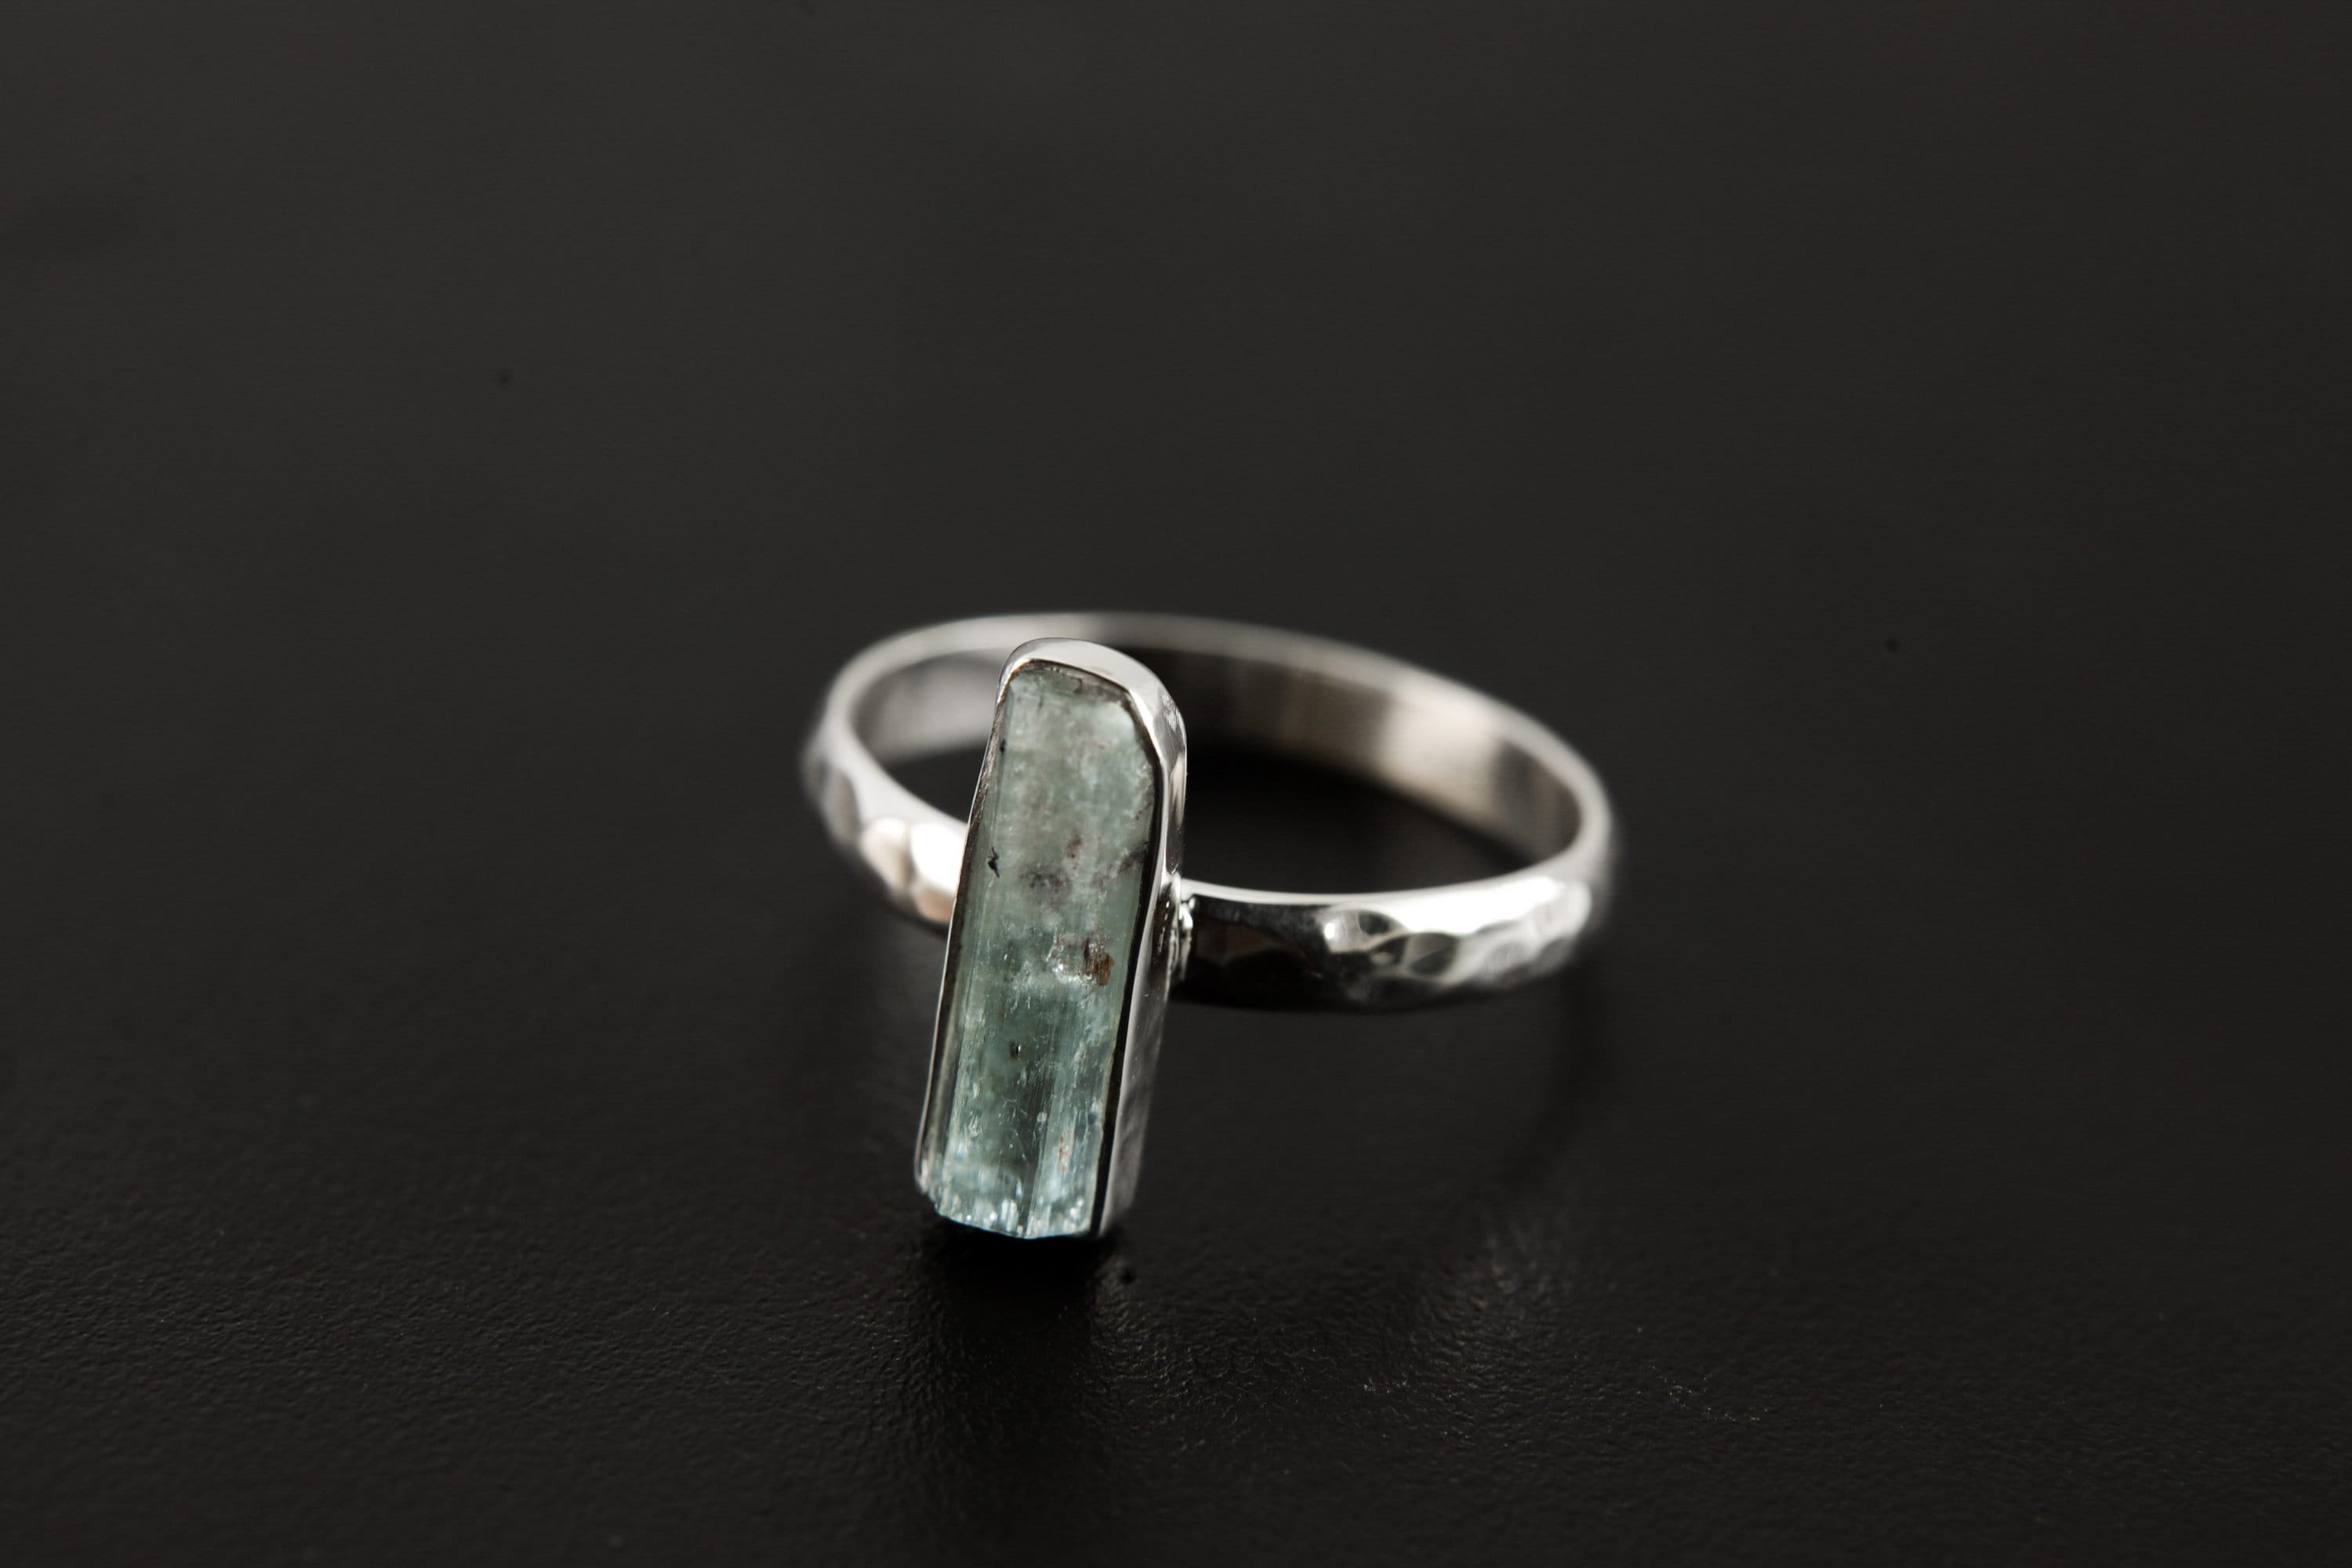 Aquamarine Crystal Ring, High Quality Gem, Sterling Silver, Hammer Textured & Shiny Half Round Band, Size 8 US, Throat Chakra, Pisces